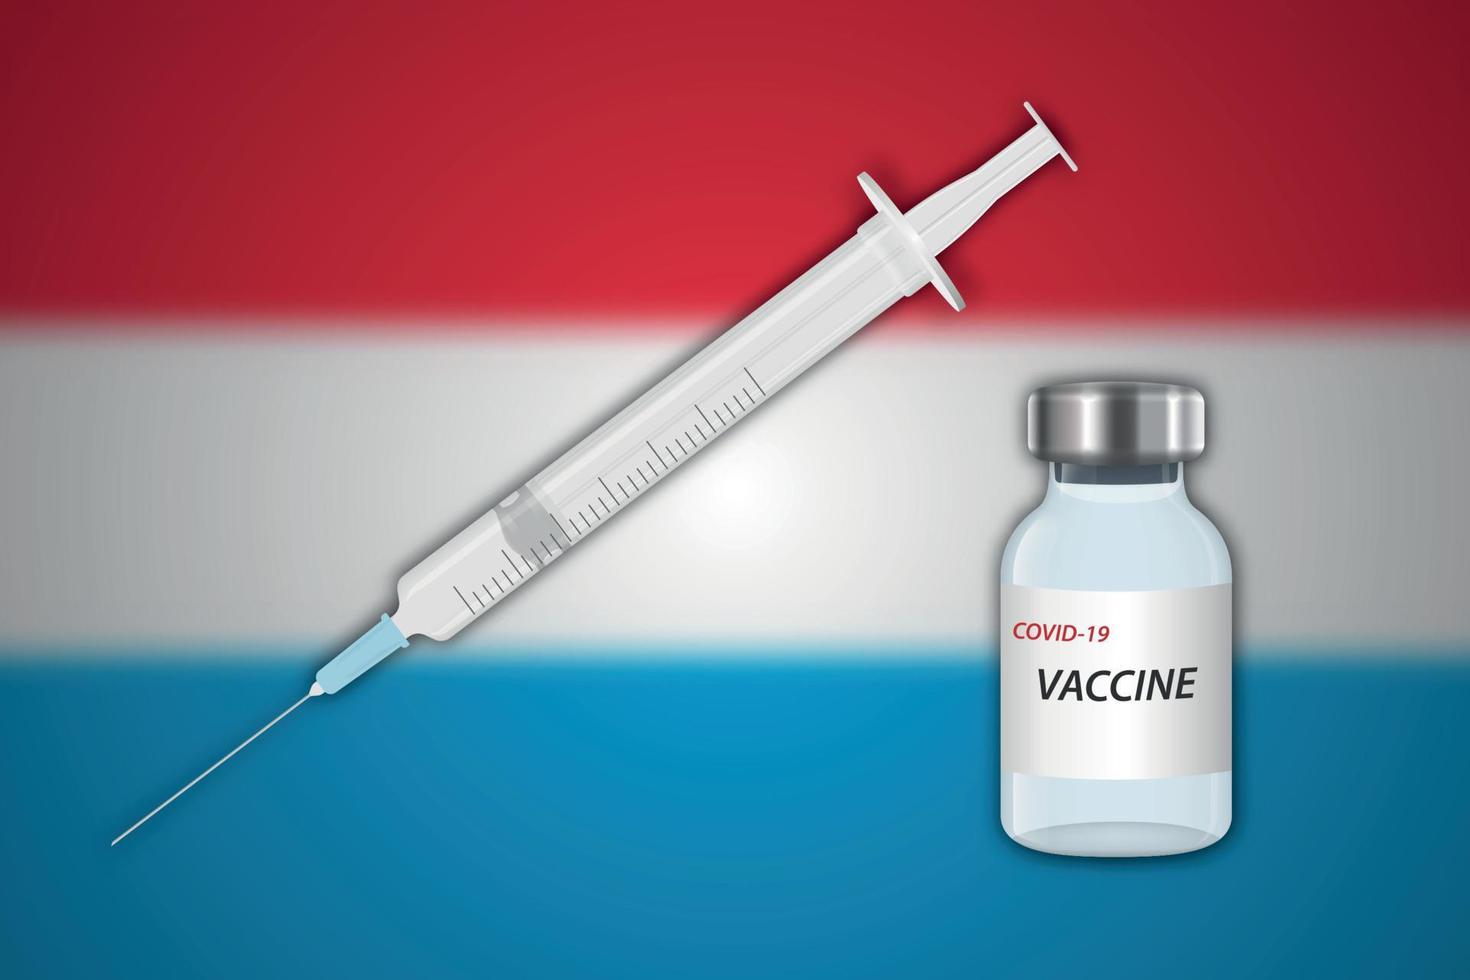 Syringe and vaccine vial on blur background with Luxembourg flag vector